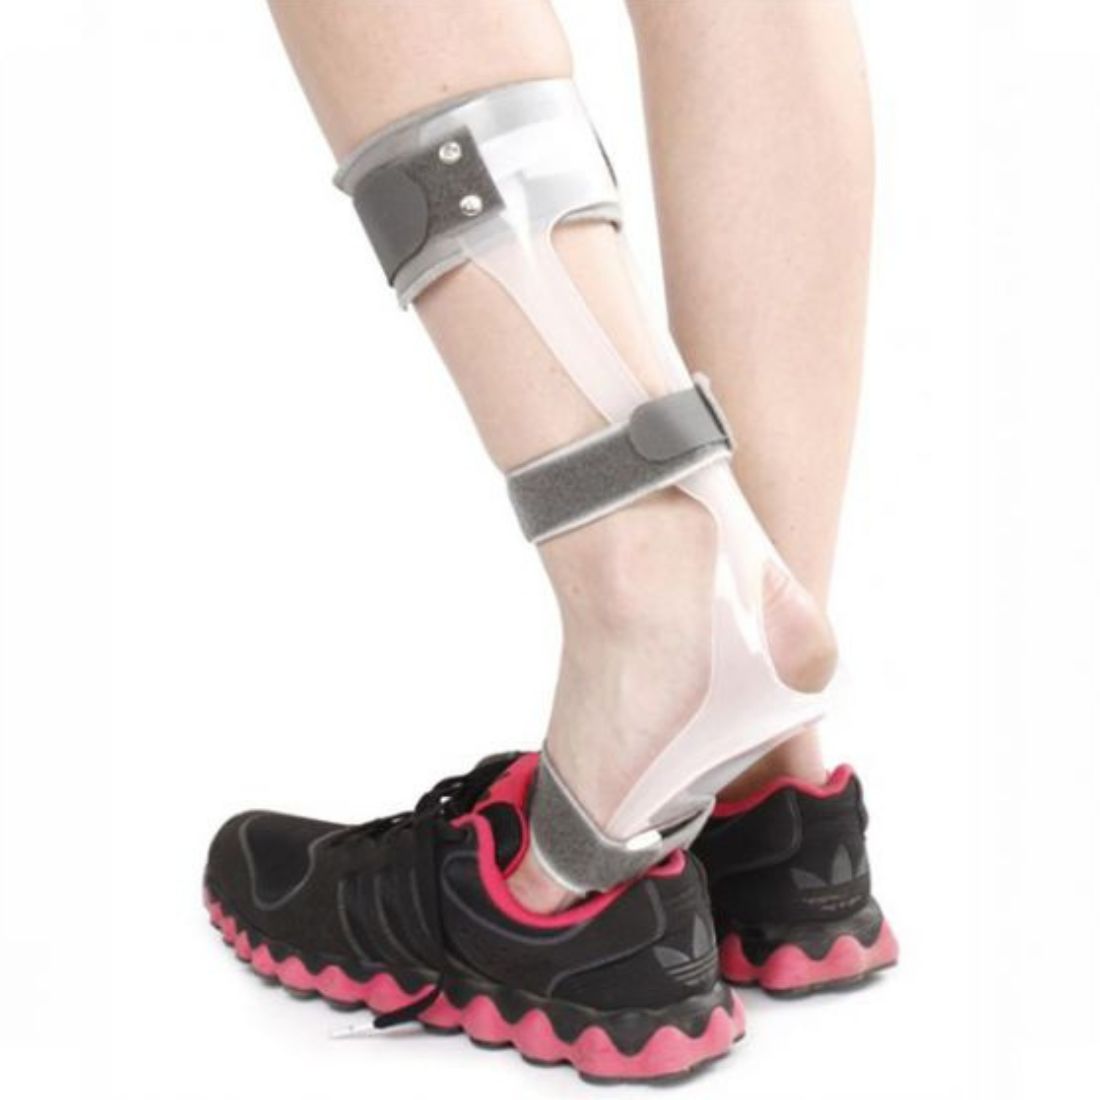 Buy Tynor Foot Drop Splint, It will helps to stabilizes the ankle and foot in all foot drop condition